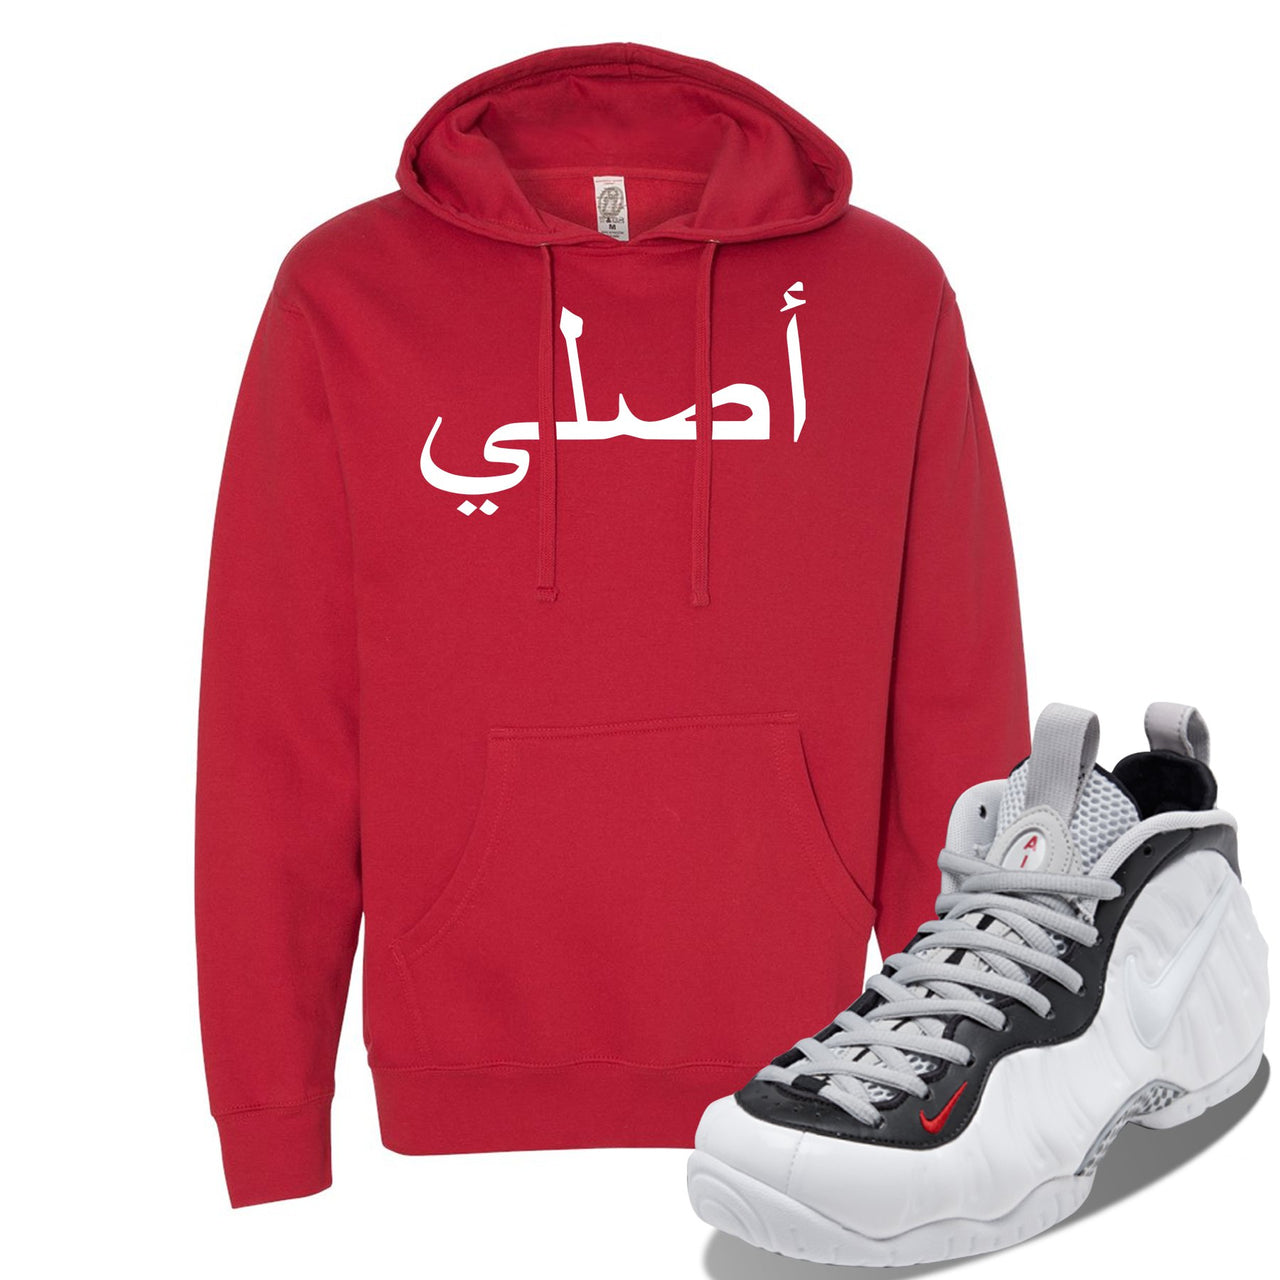 Foamposite Pro White Black University Red Sneaker Red Pullover Hoodie | Hoodie to match Nike Air Foamposite Pro White Black University Red Shoes | Original Arabic